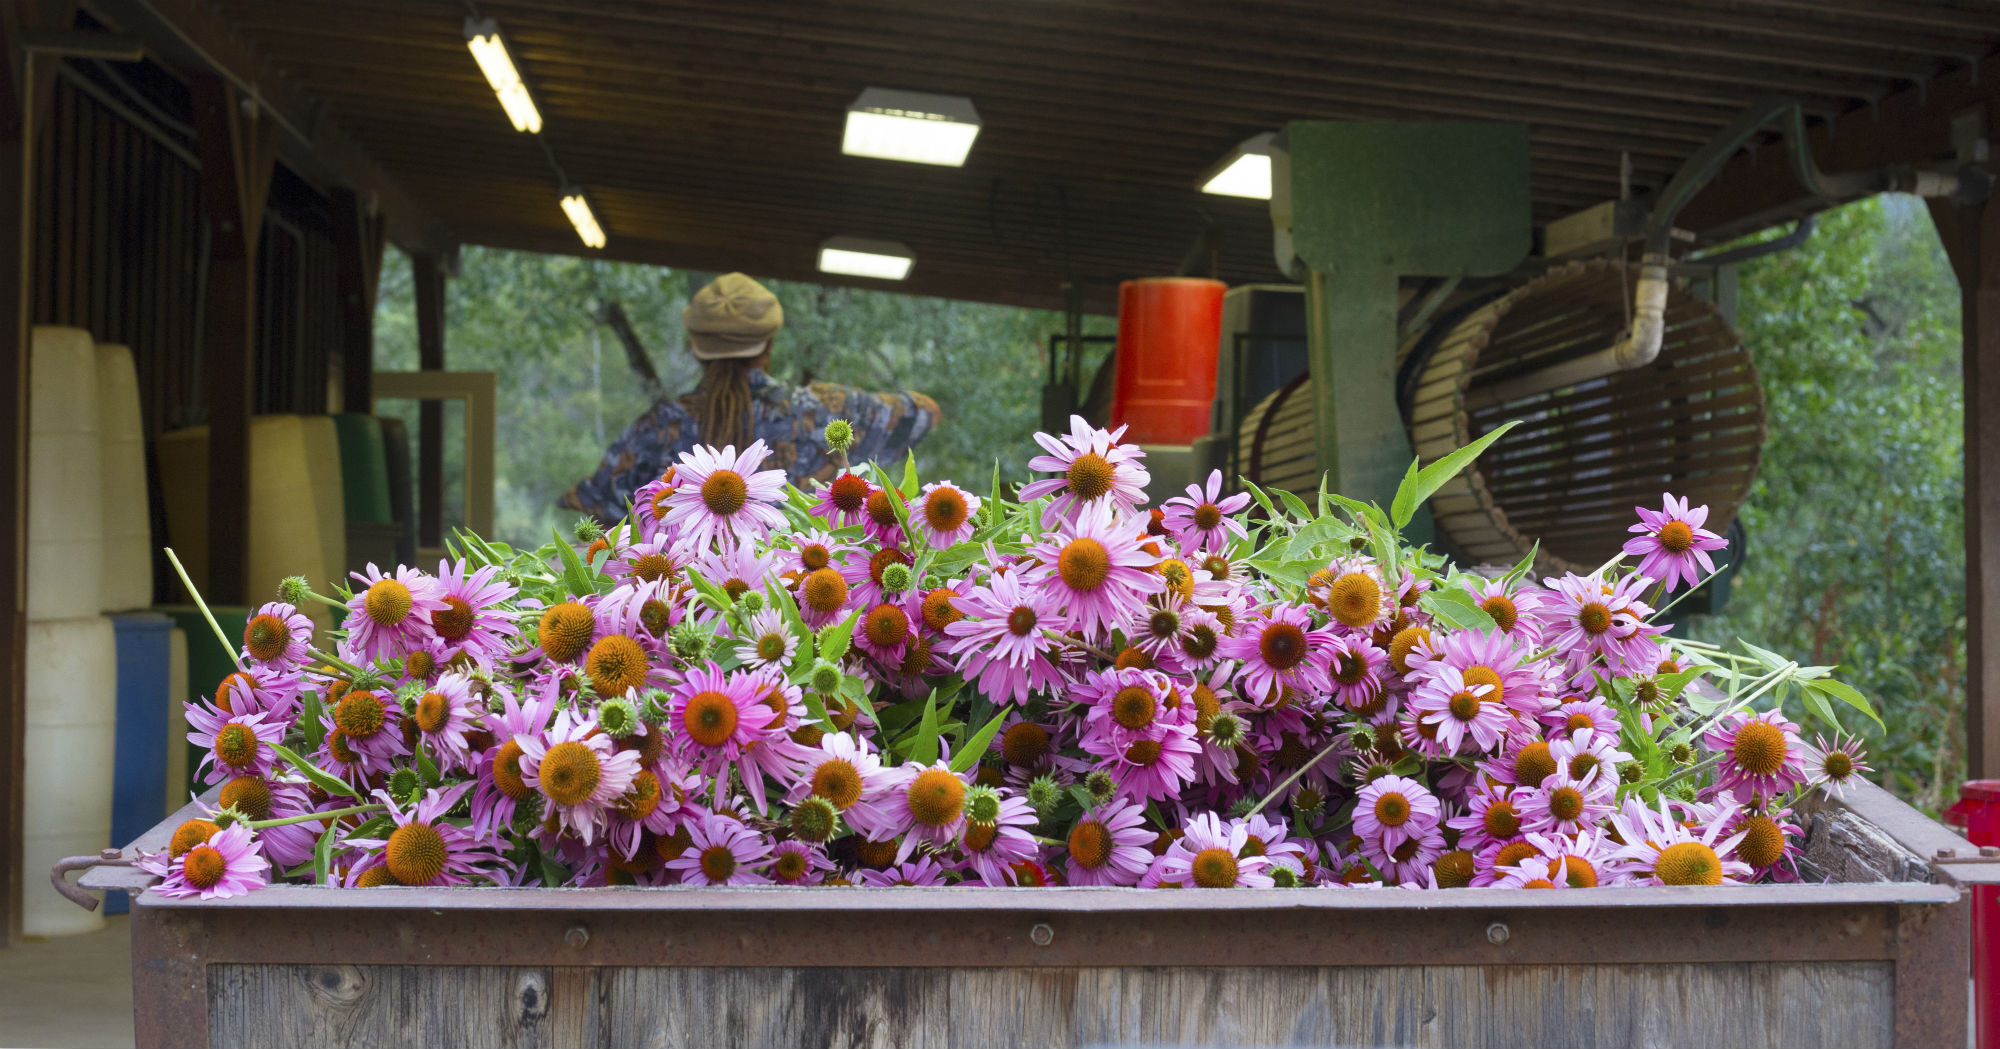 Taking the Echinacea to the barn